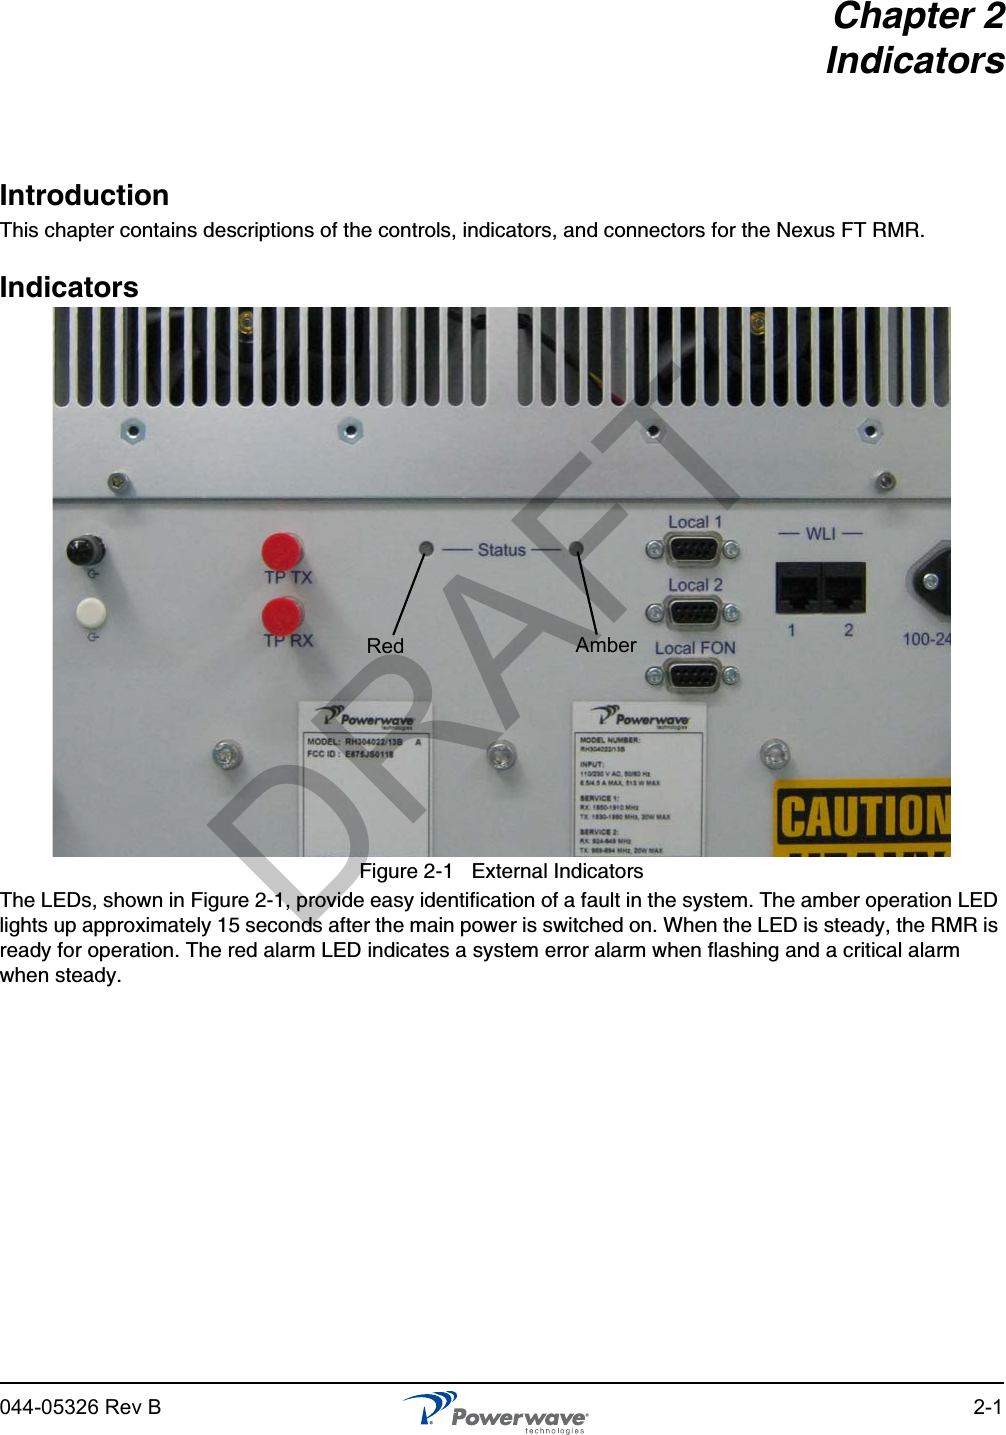 044-05326 Rev B 2-1Chapter 2IndicatorsIntroductionThis chapter contains descriptions of the controls, indicators, and connectors for the Nexus FT RMR. IndicatorsFigure 2-1   External IndicatorsThe LEDs, shown in Figure 2-1, provide easy identification of a fault in the system. The amber operation LED lights up approximately 15 seconds after the main power is switched on. When the LED is steady, the RMR is ready for operation. The red alarm LED indicates a system error alarm when flashing and a critical alarm when steady.Red AmberDRAFT